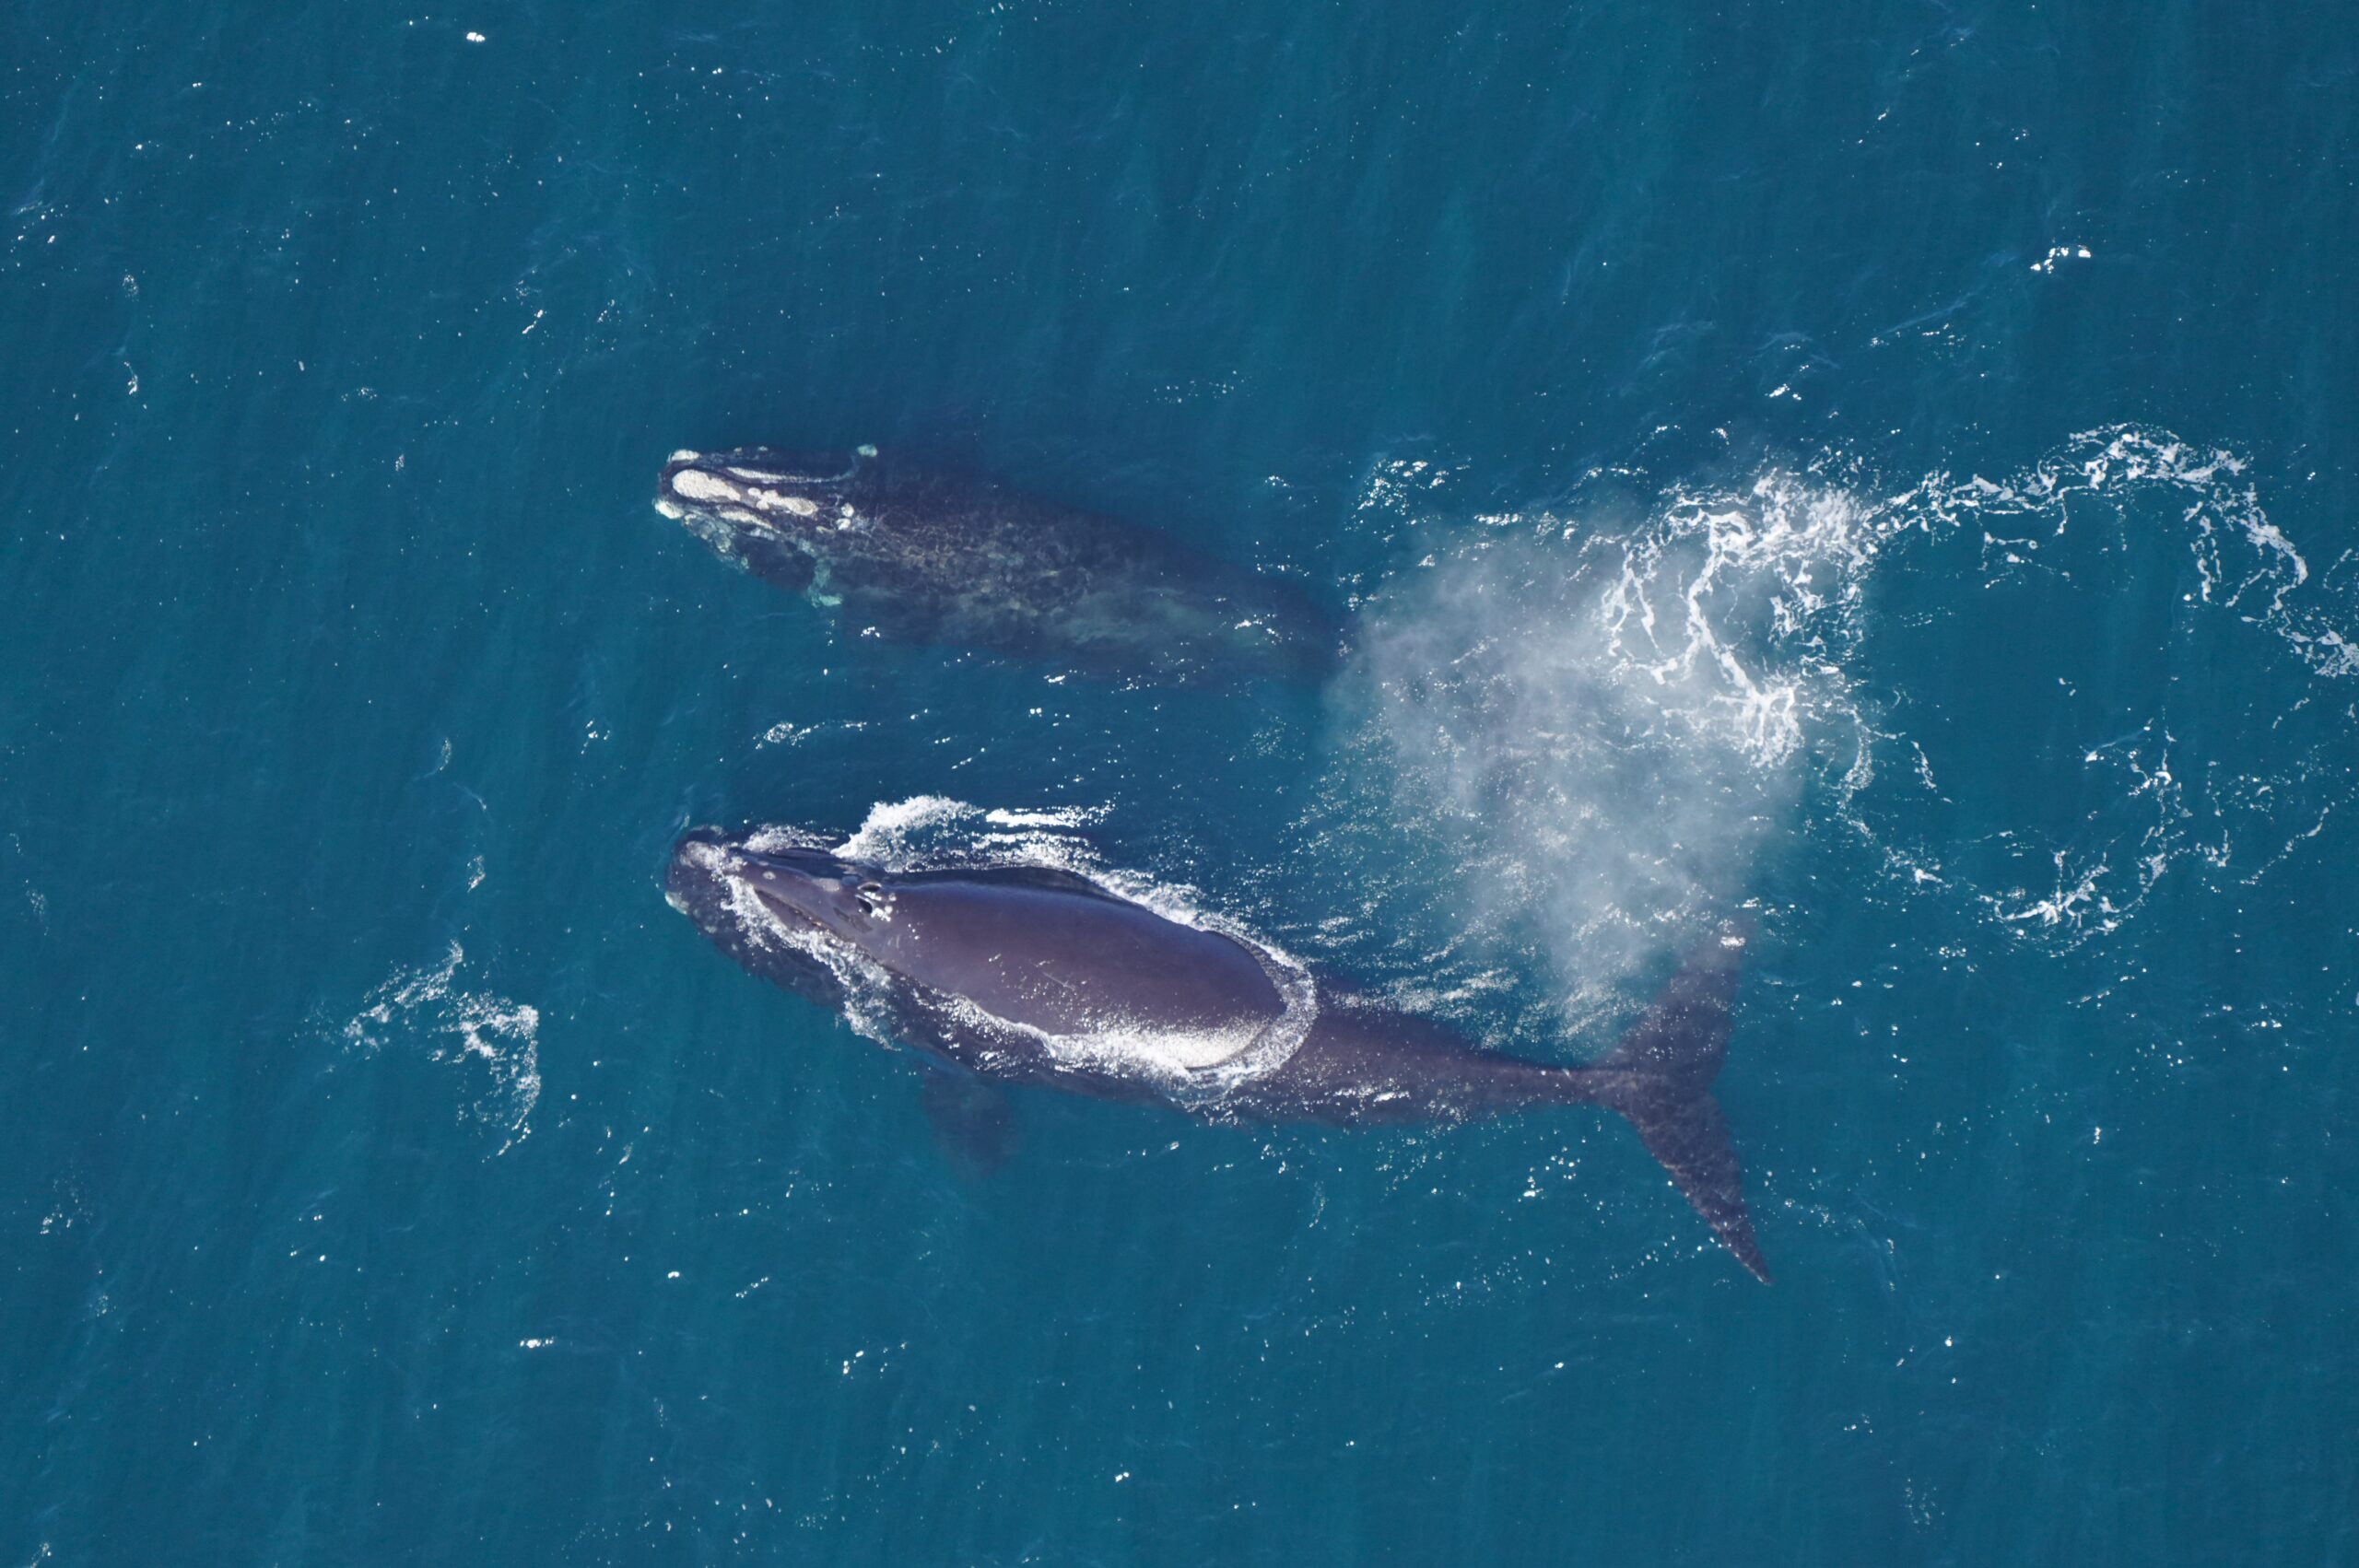 Right whale female “Fission” (Catalog #3790) with unnamed juvenile male whale Catalog #5191 during an aerial survey over southern New England waters in March 2023. CREDIT: New England Aquarium, taken under NOAA research permit #25739